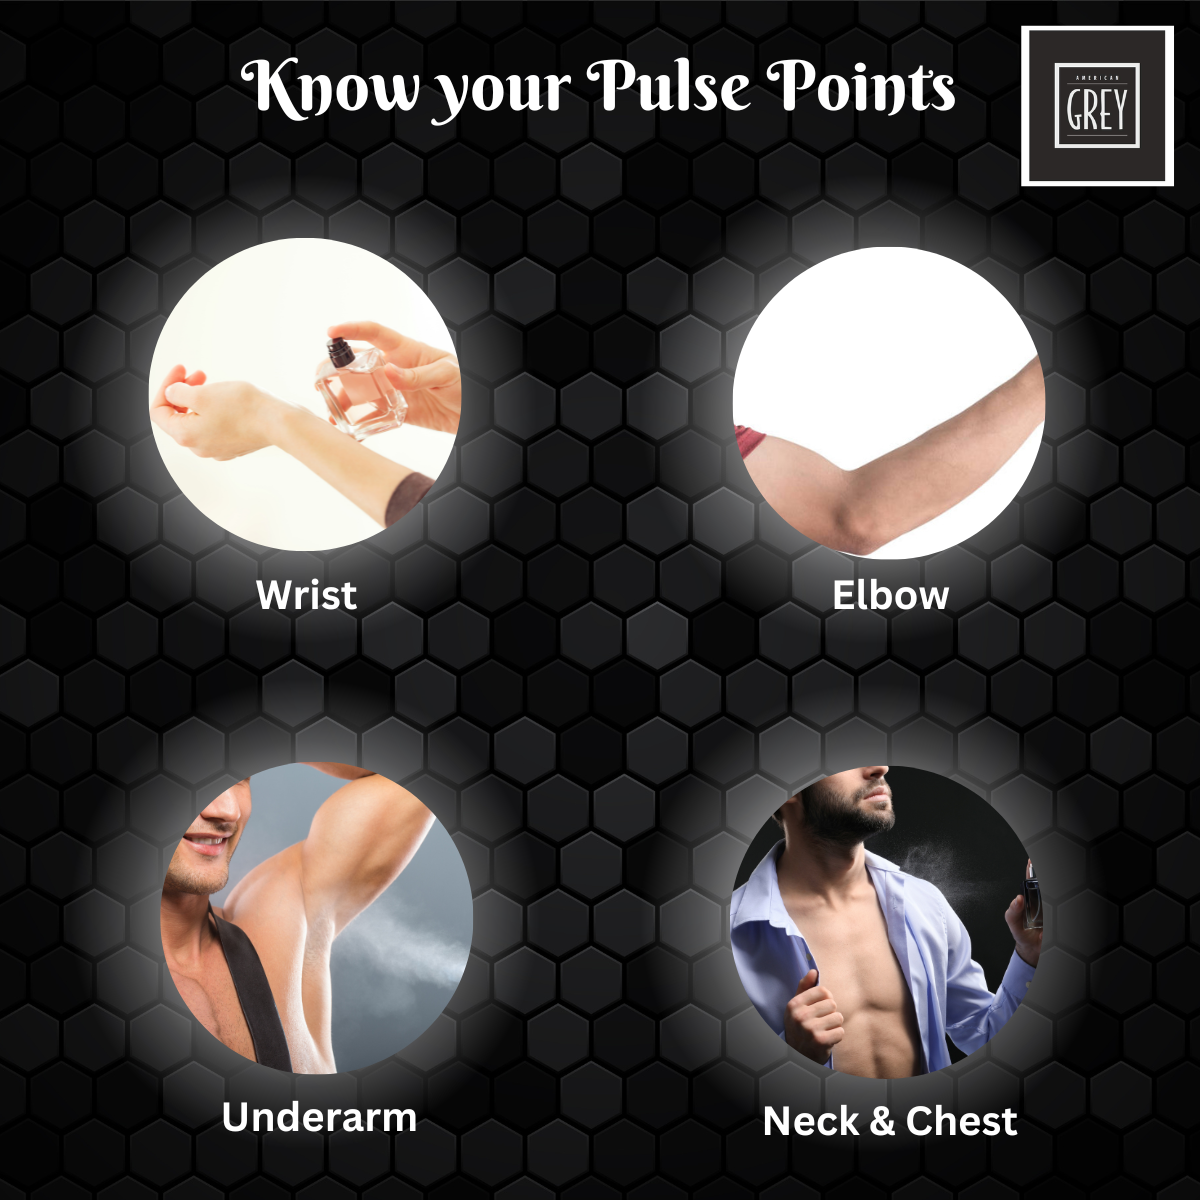 know your pulse points, pulse points, american grey amber spice deo, deo spray for him, what are the pulse points to apply deodorant for men, men deodorant, deodorant spray for men, what are the pulse points for perfume male, what is the best way to apply deodorant for men,where are male pulse points, deodorant tips for men, deodorant tips for male in india, deo pulse points myths, best pulse points for deo male,  top rated mens deo, men grooming essential, men fragrance for winter season, best deo for cold weather, popular winter deodorant for men, best smelling deo for autumn season